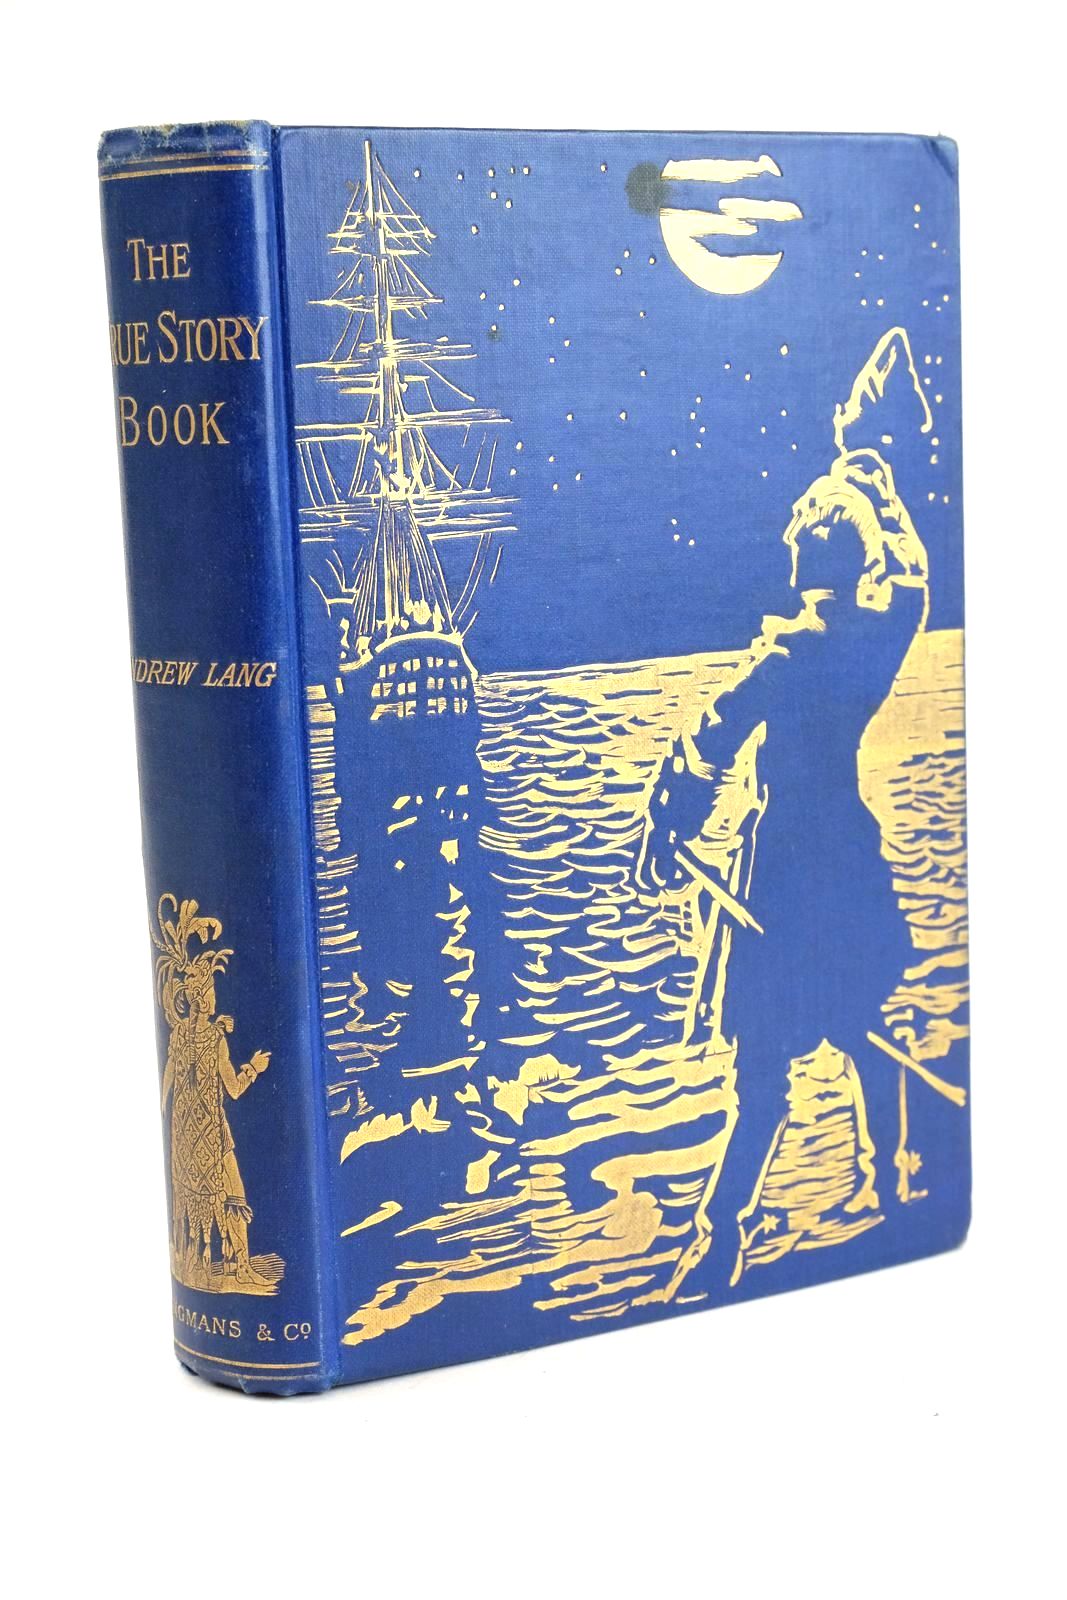 Photo of THE TRUE STORY BOOK written by Lang, Andrew illustrated by Bogle, Lockhart Davis, Lucien Ford, H.J. Kerr, C. H. M. Speed, Lancelot published by Longmans, Green &amp; Co. (STOCK CODE: 1324584)  for sale by Stella & Rose's Books